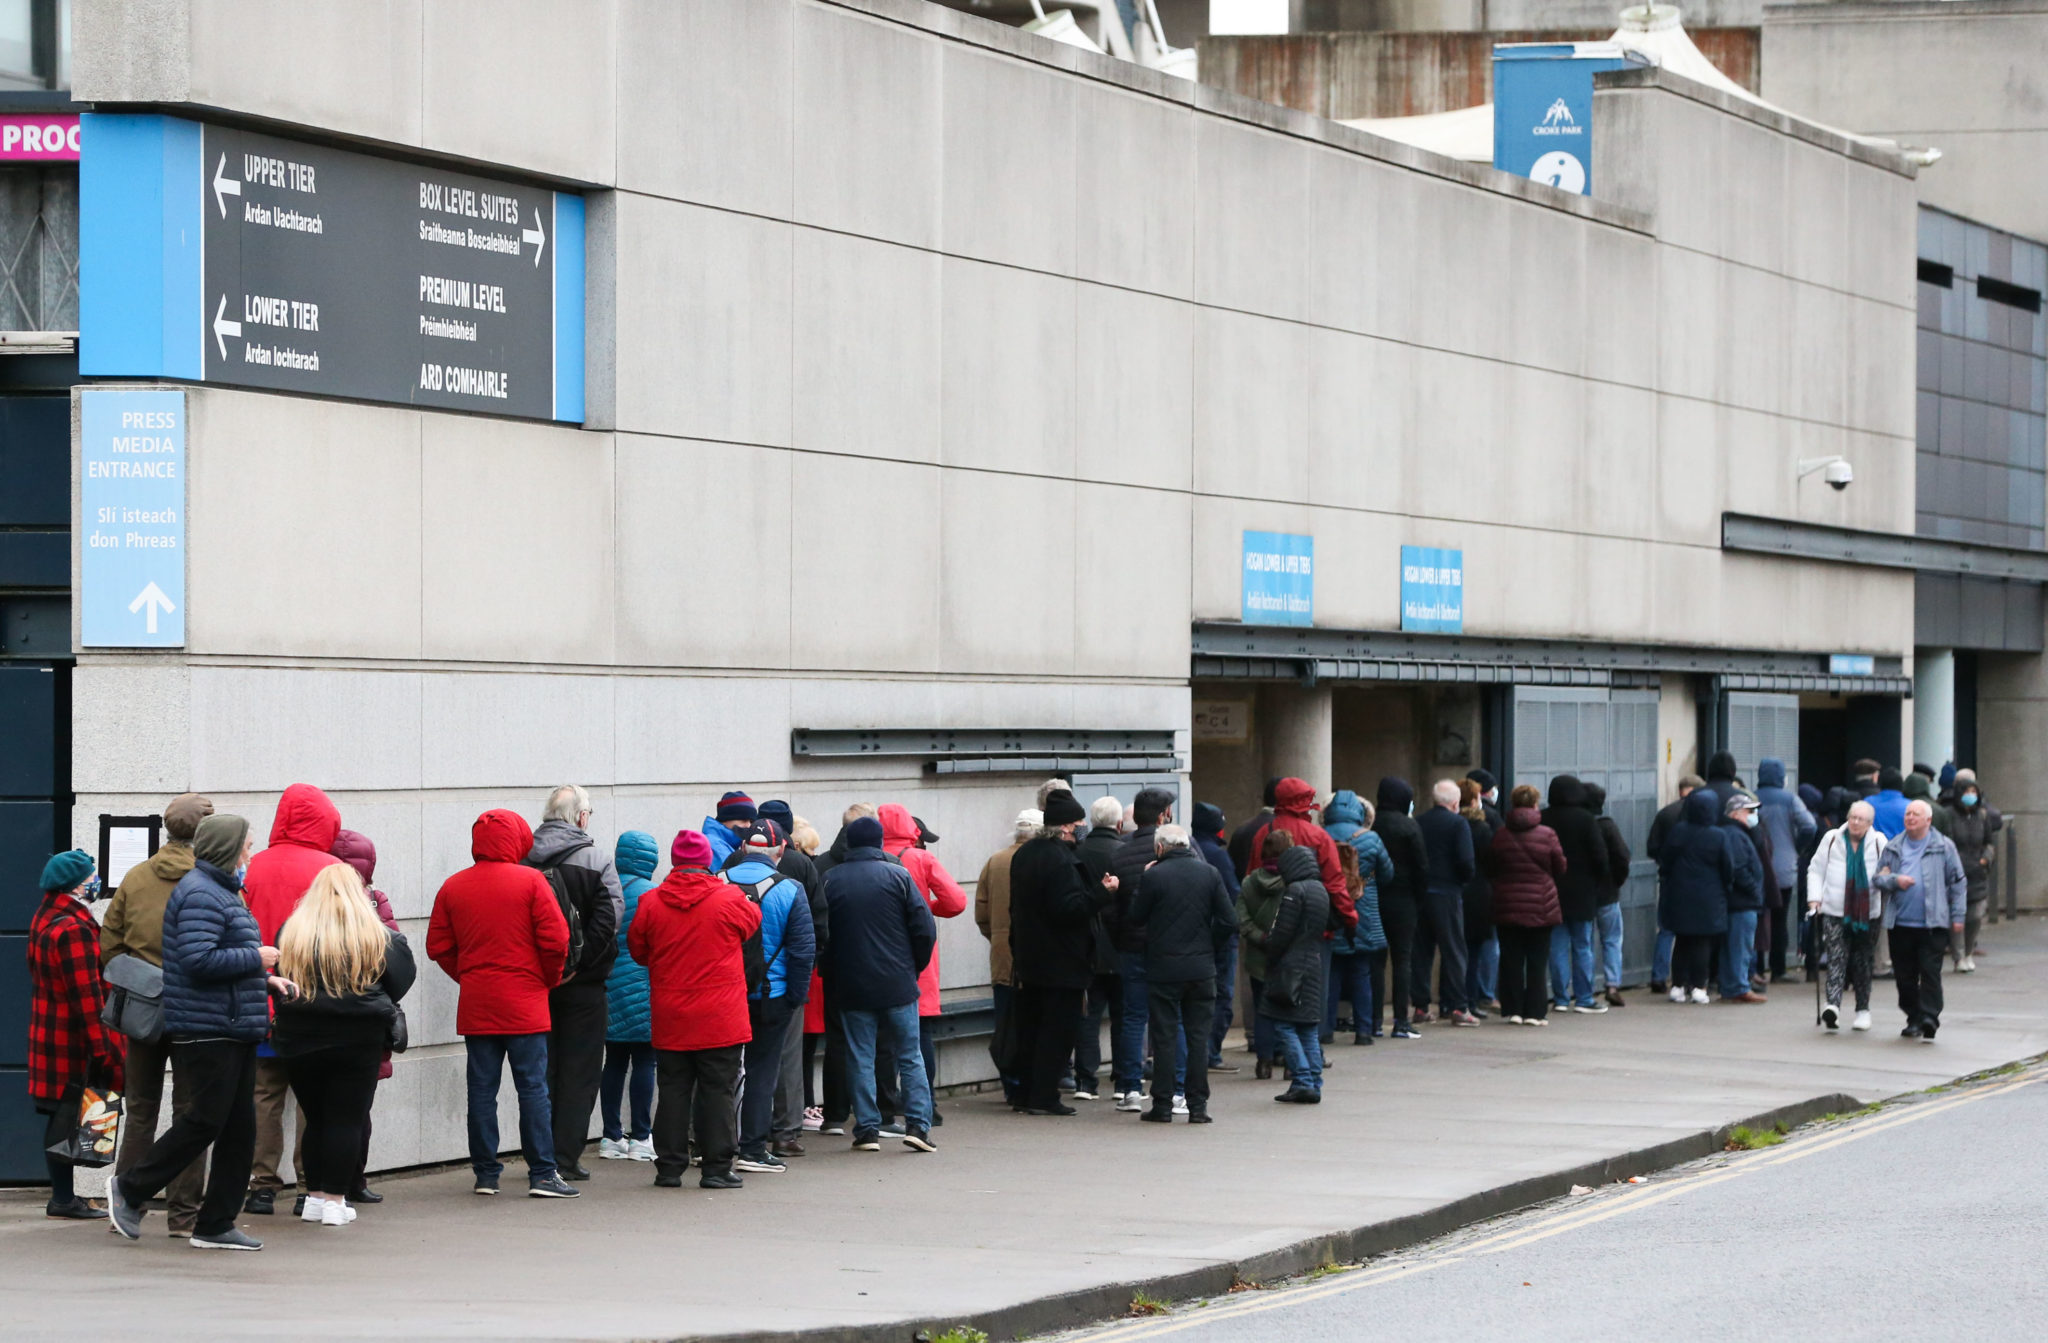 Main image shows long queues of people outside the Croke Park walk-in vaccine centre,